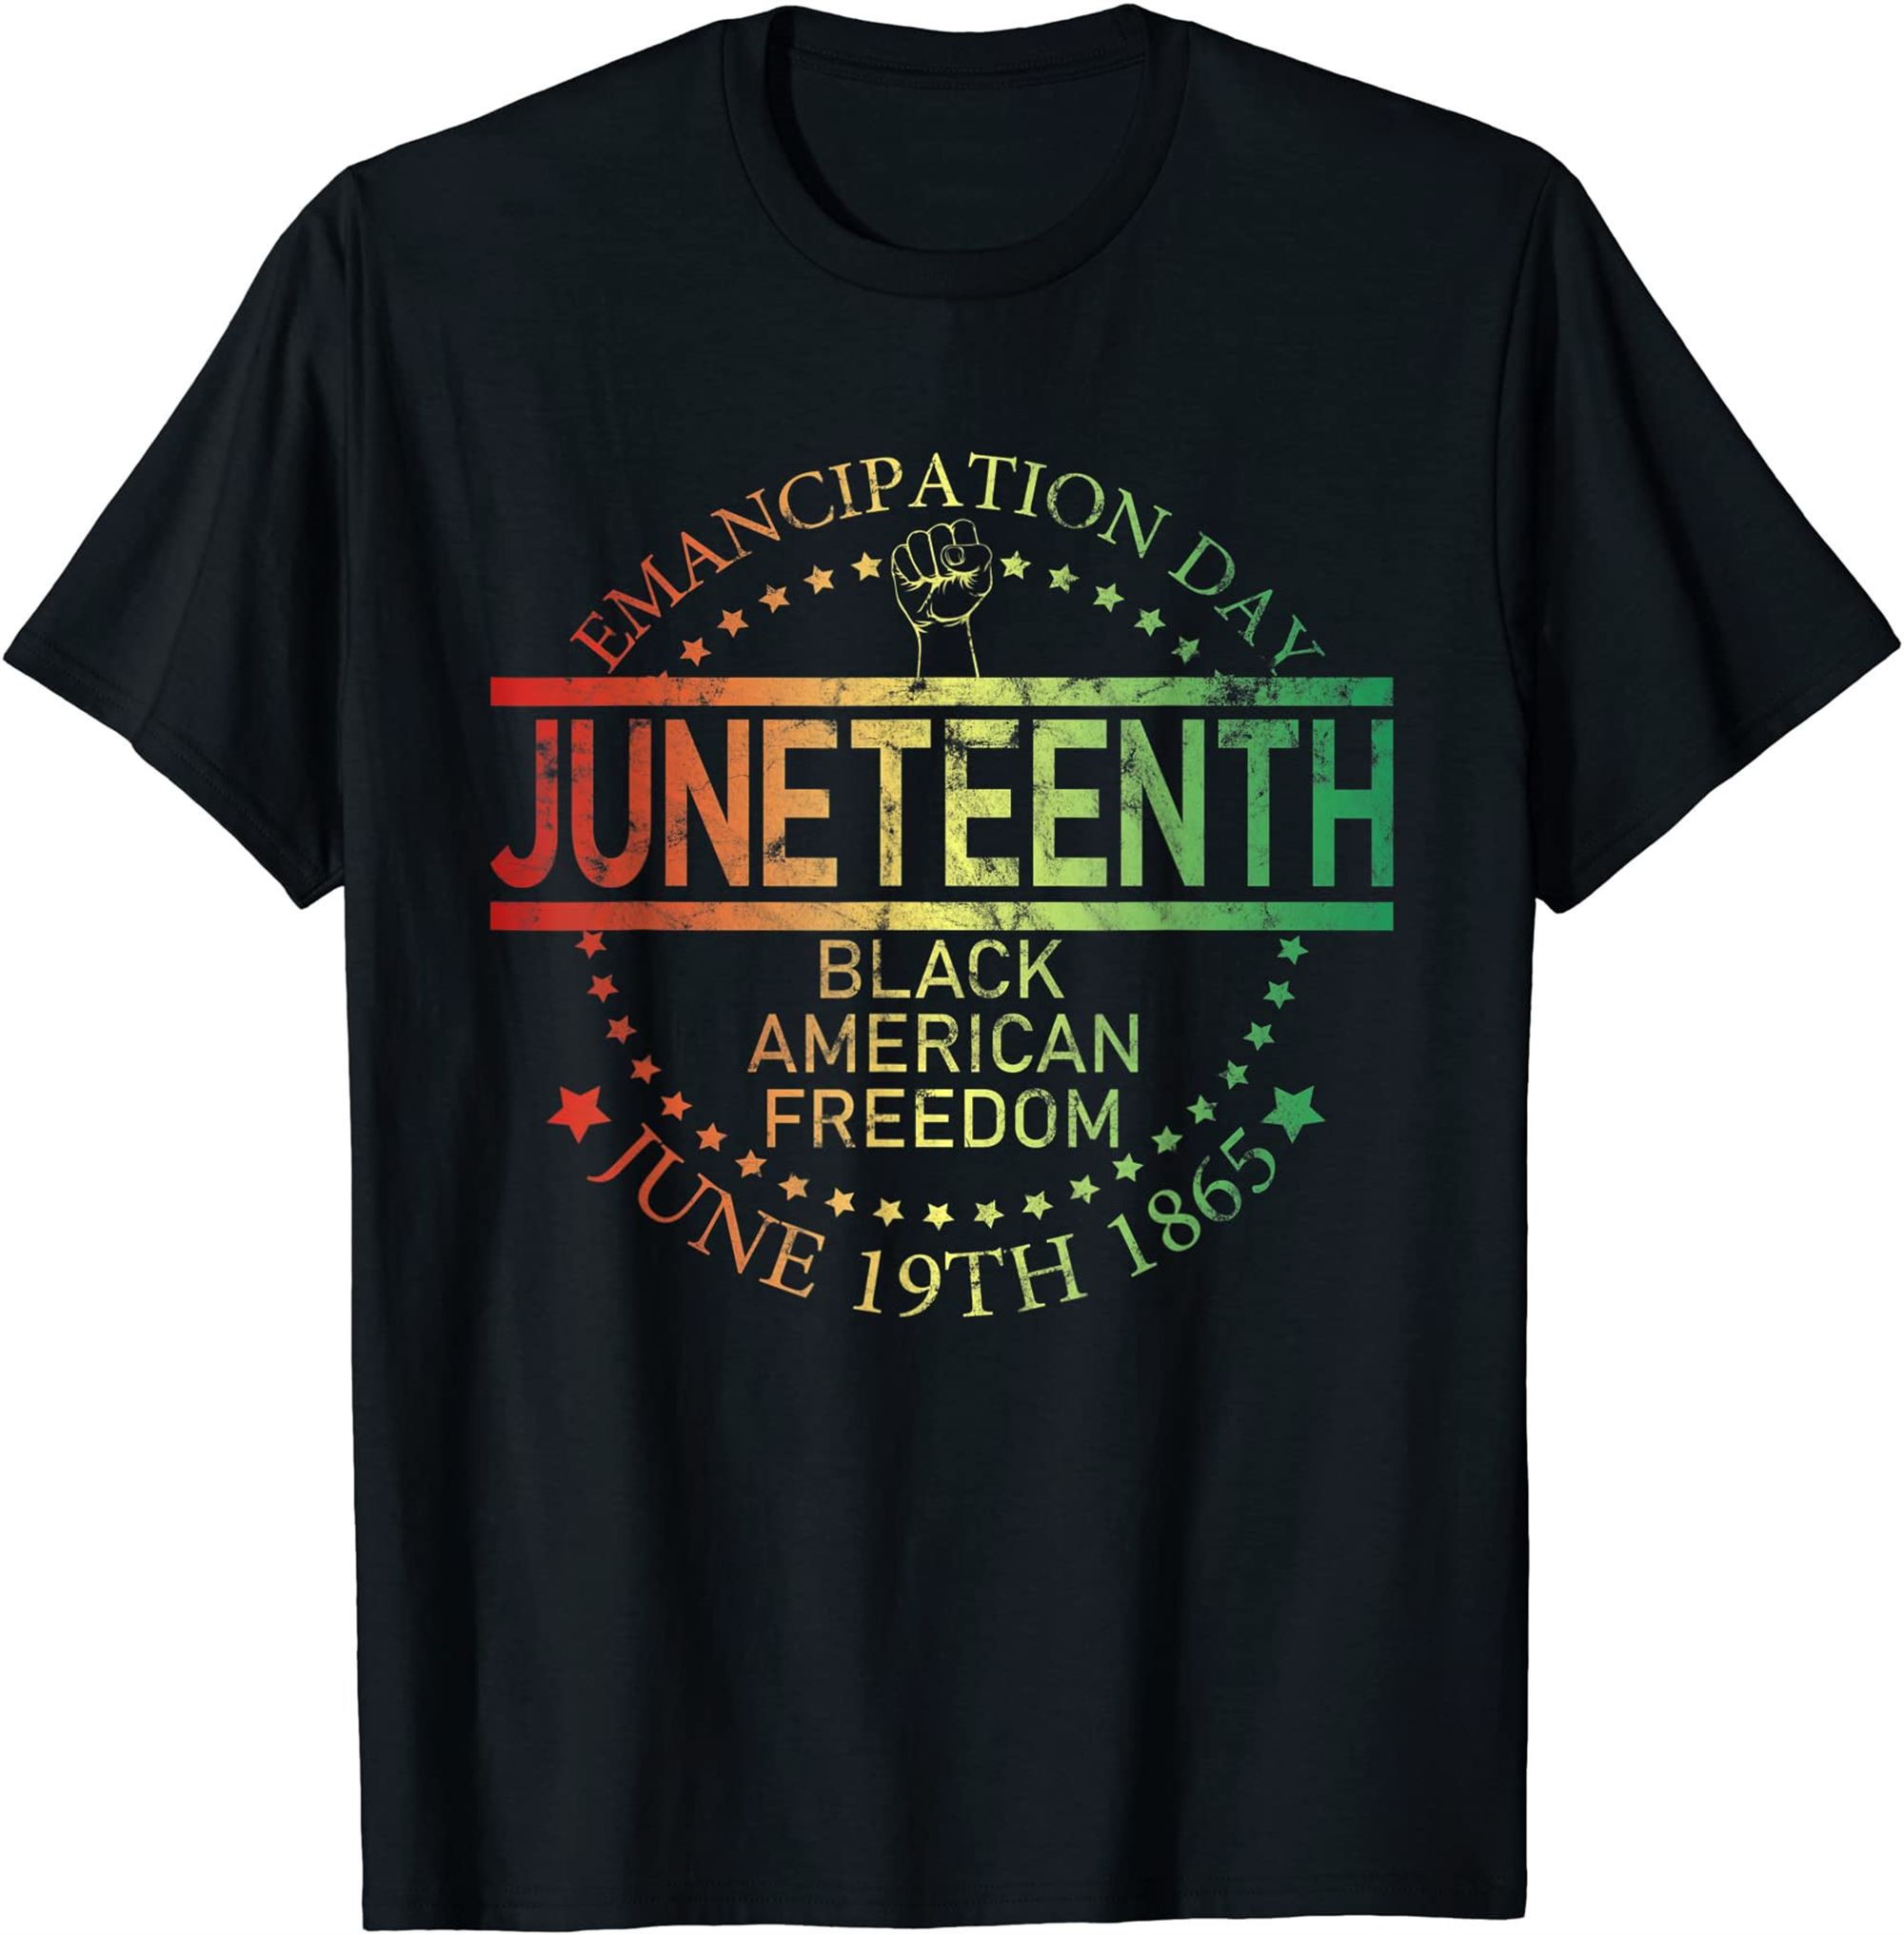 Juneteenth Black African Juneteenth Black History Tee T-shirt Plus Size Up To 5xl